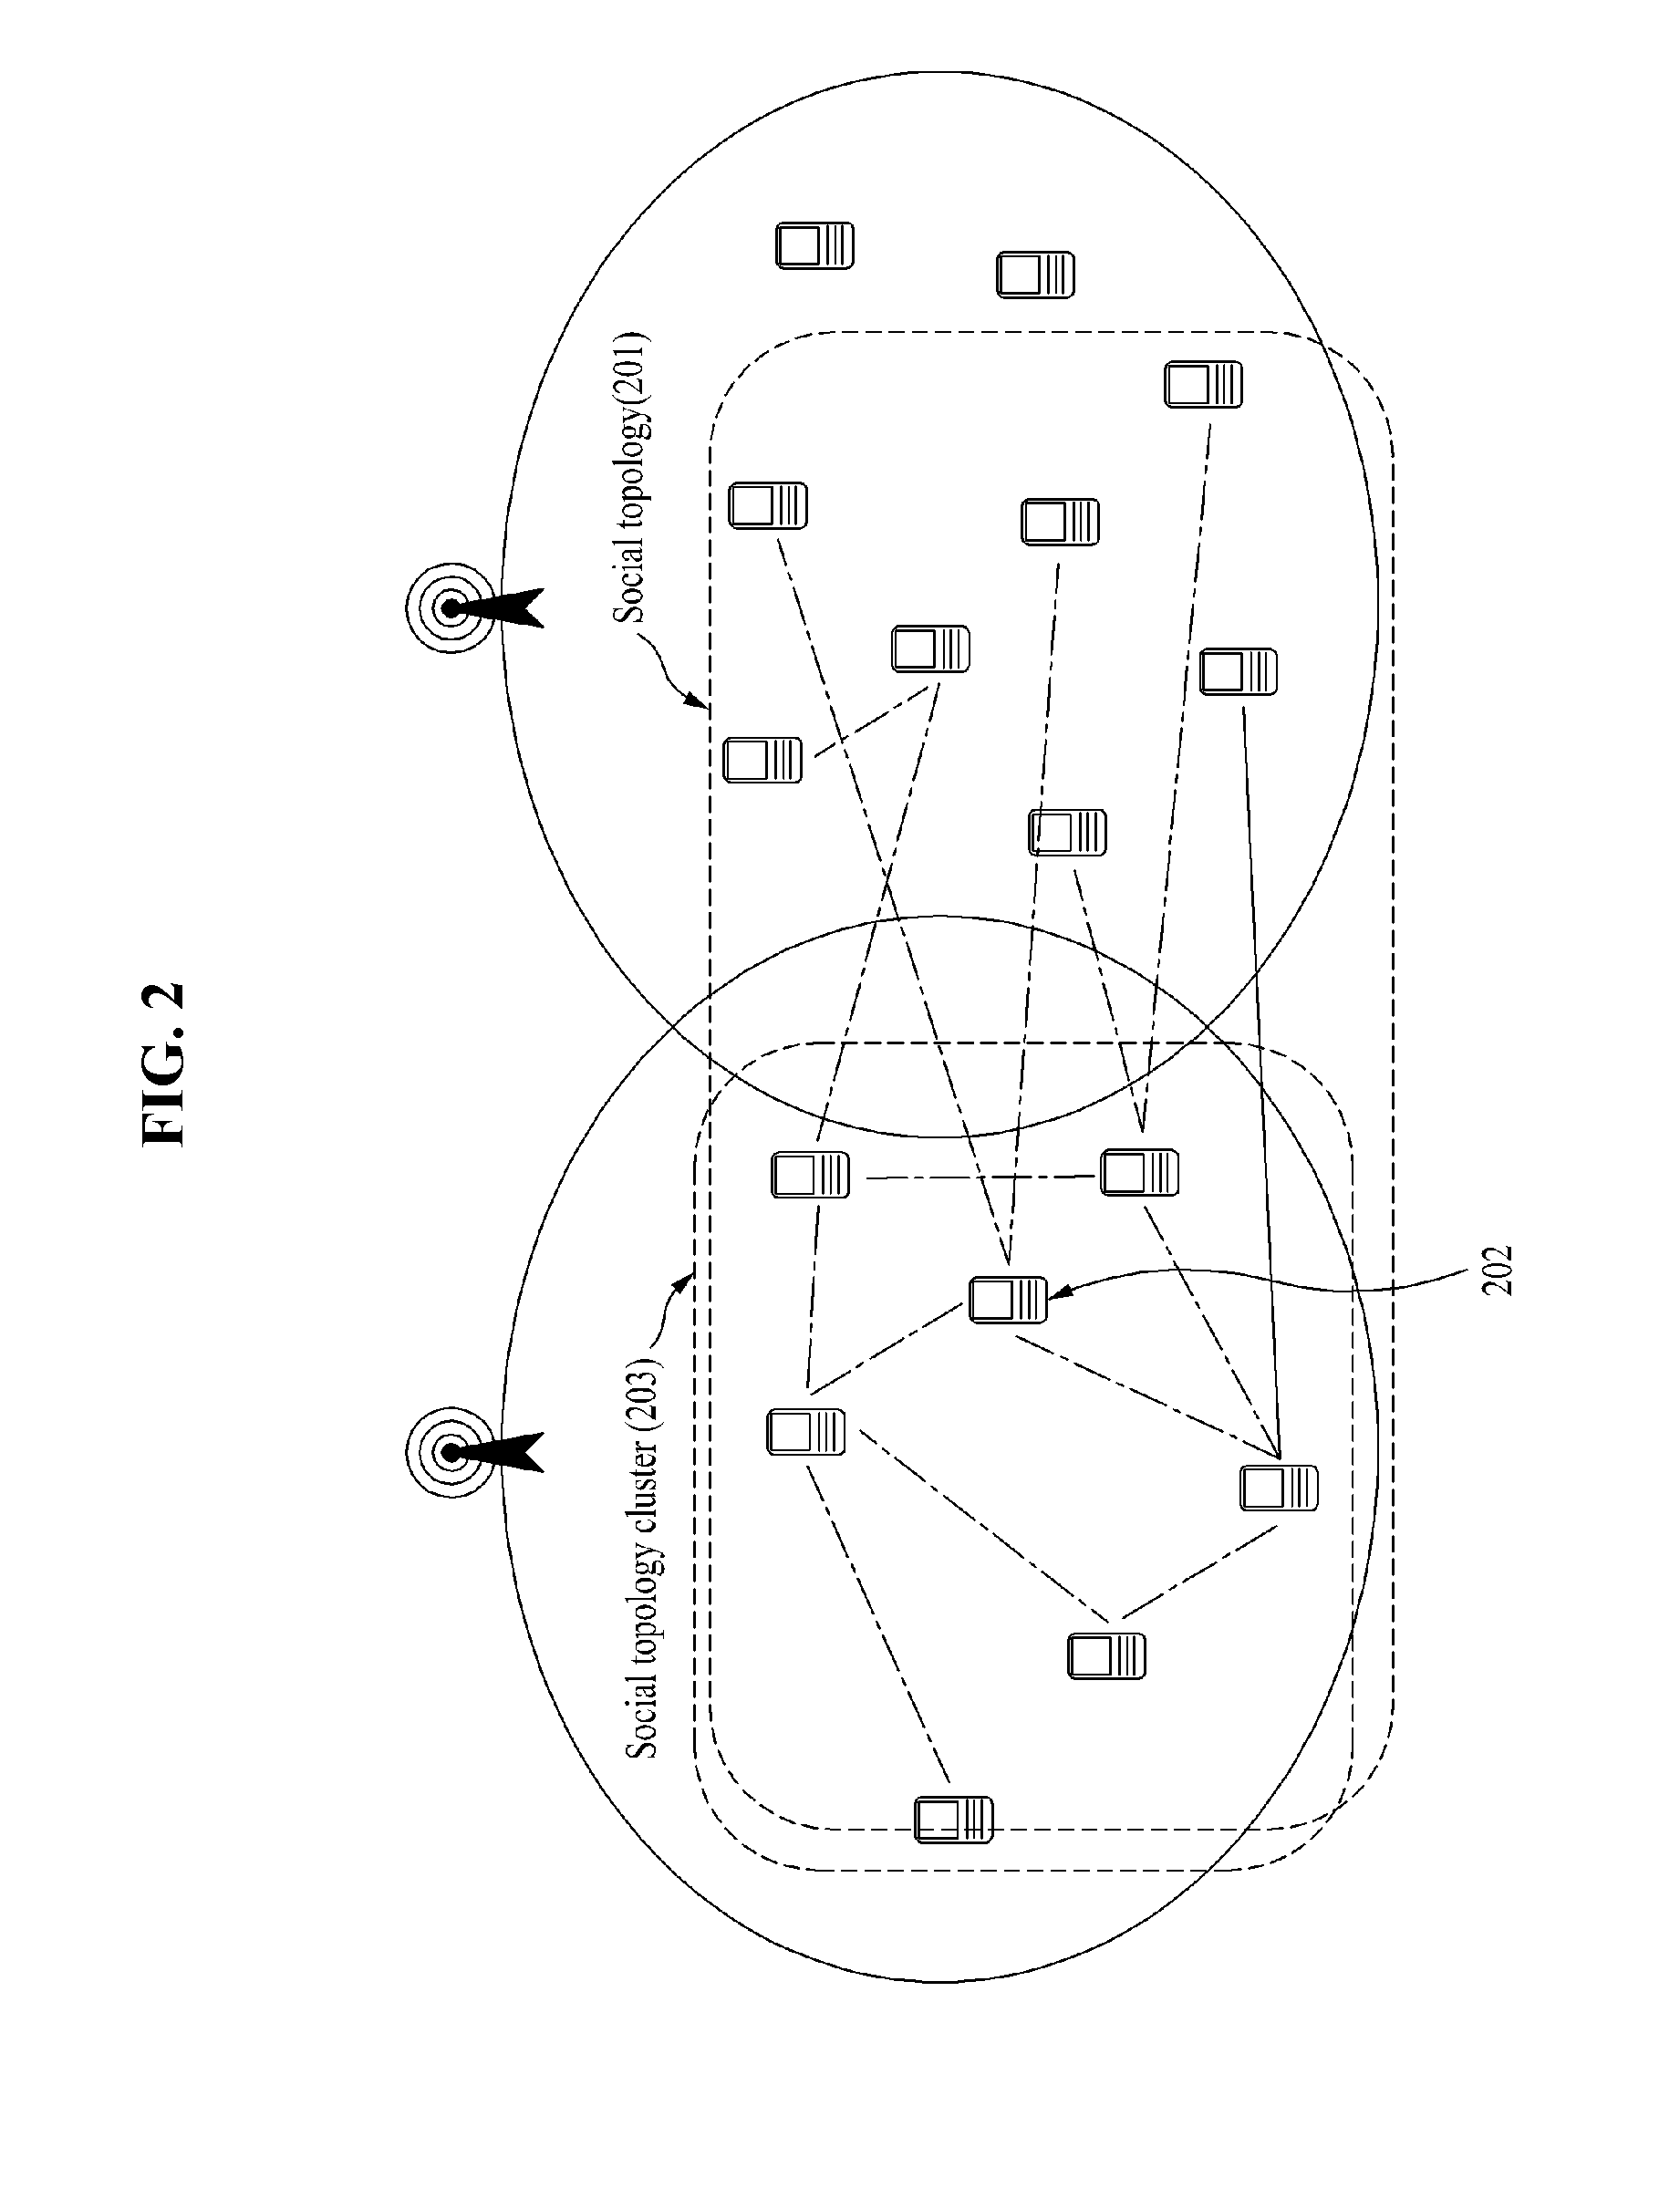 System and method for providing distributed virtual cloud using mobile grid